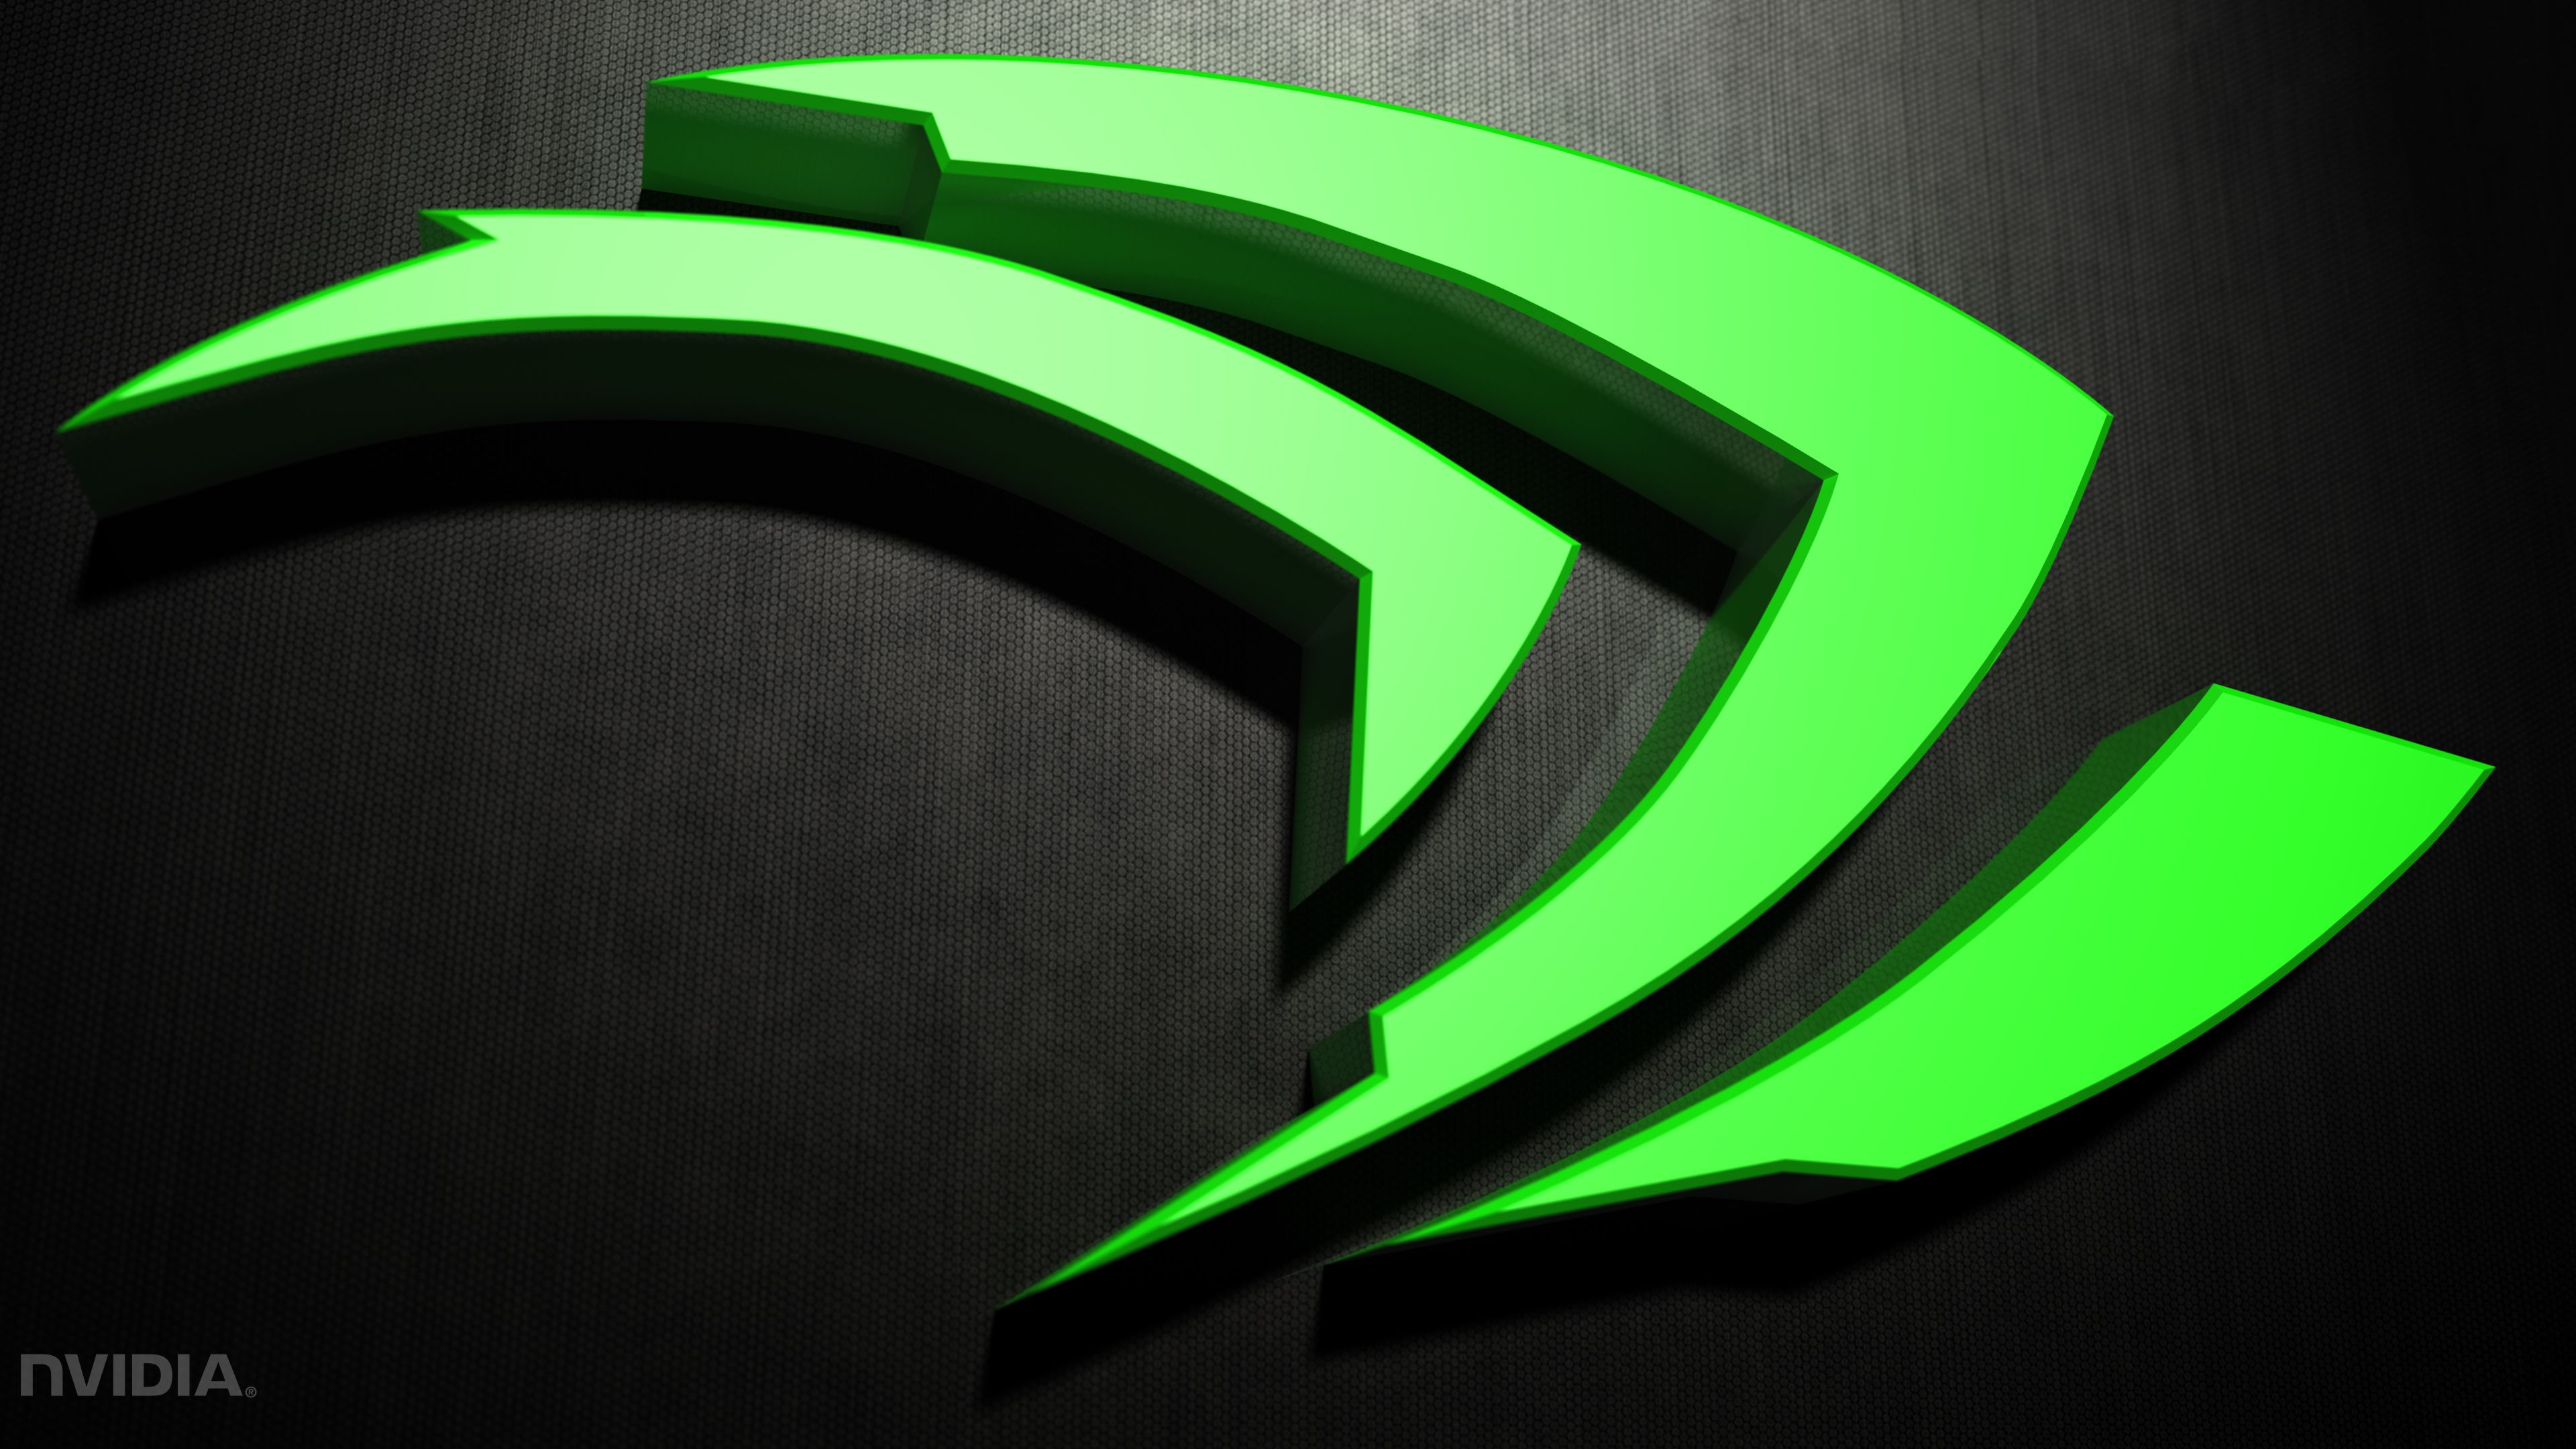 63 Nvidia HD Wallpapers | Backgrounds - Wallpaper Abyss